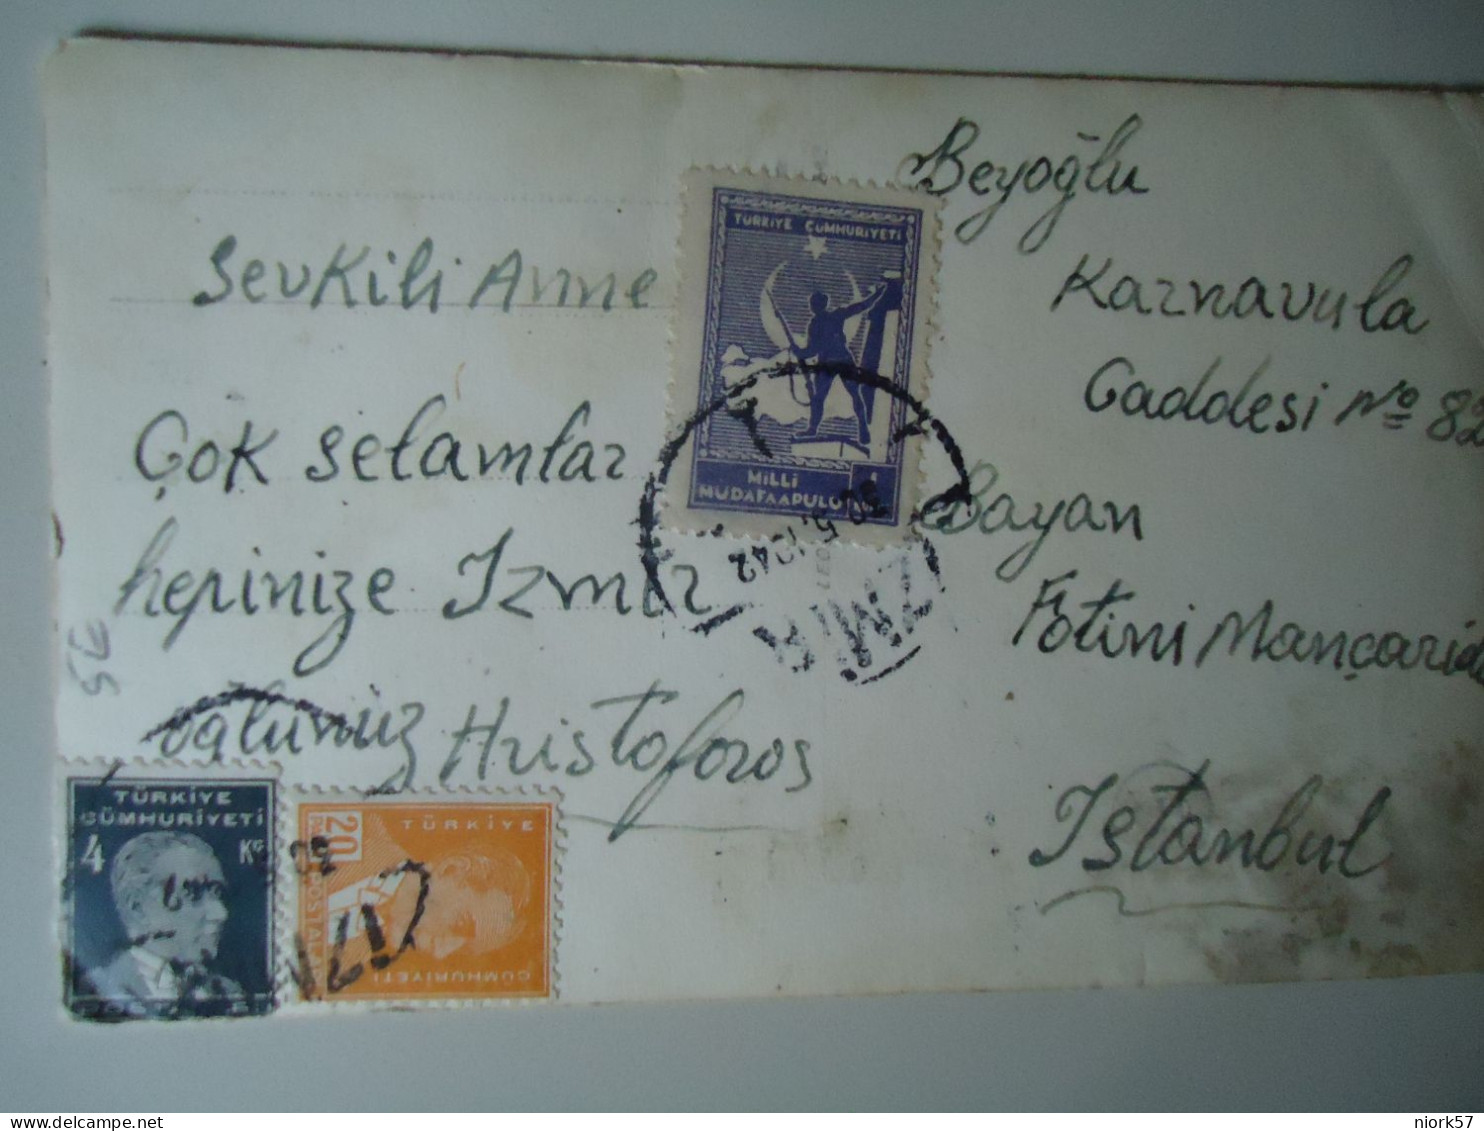 TURKEY  PHOTO  POSTCARDS  1942   ΣΤΗΝ ΚΩΝΣΤΑΝΤΙΝΟΥΠΛΗ  CONSTANTINOPLE 3 STAMPS IZMIR  FOR MORE PURCHASES 10% DISCOUNT - Greece